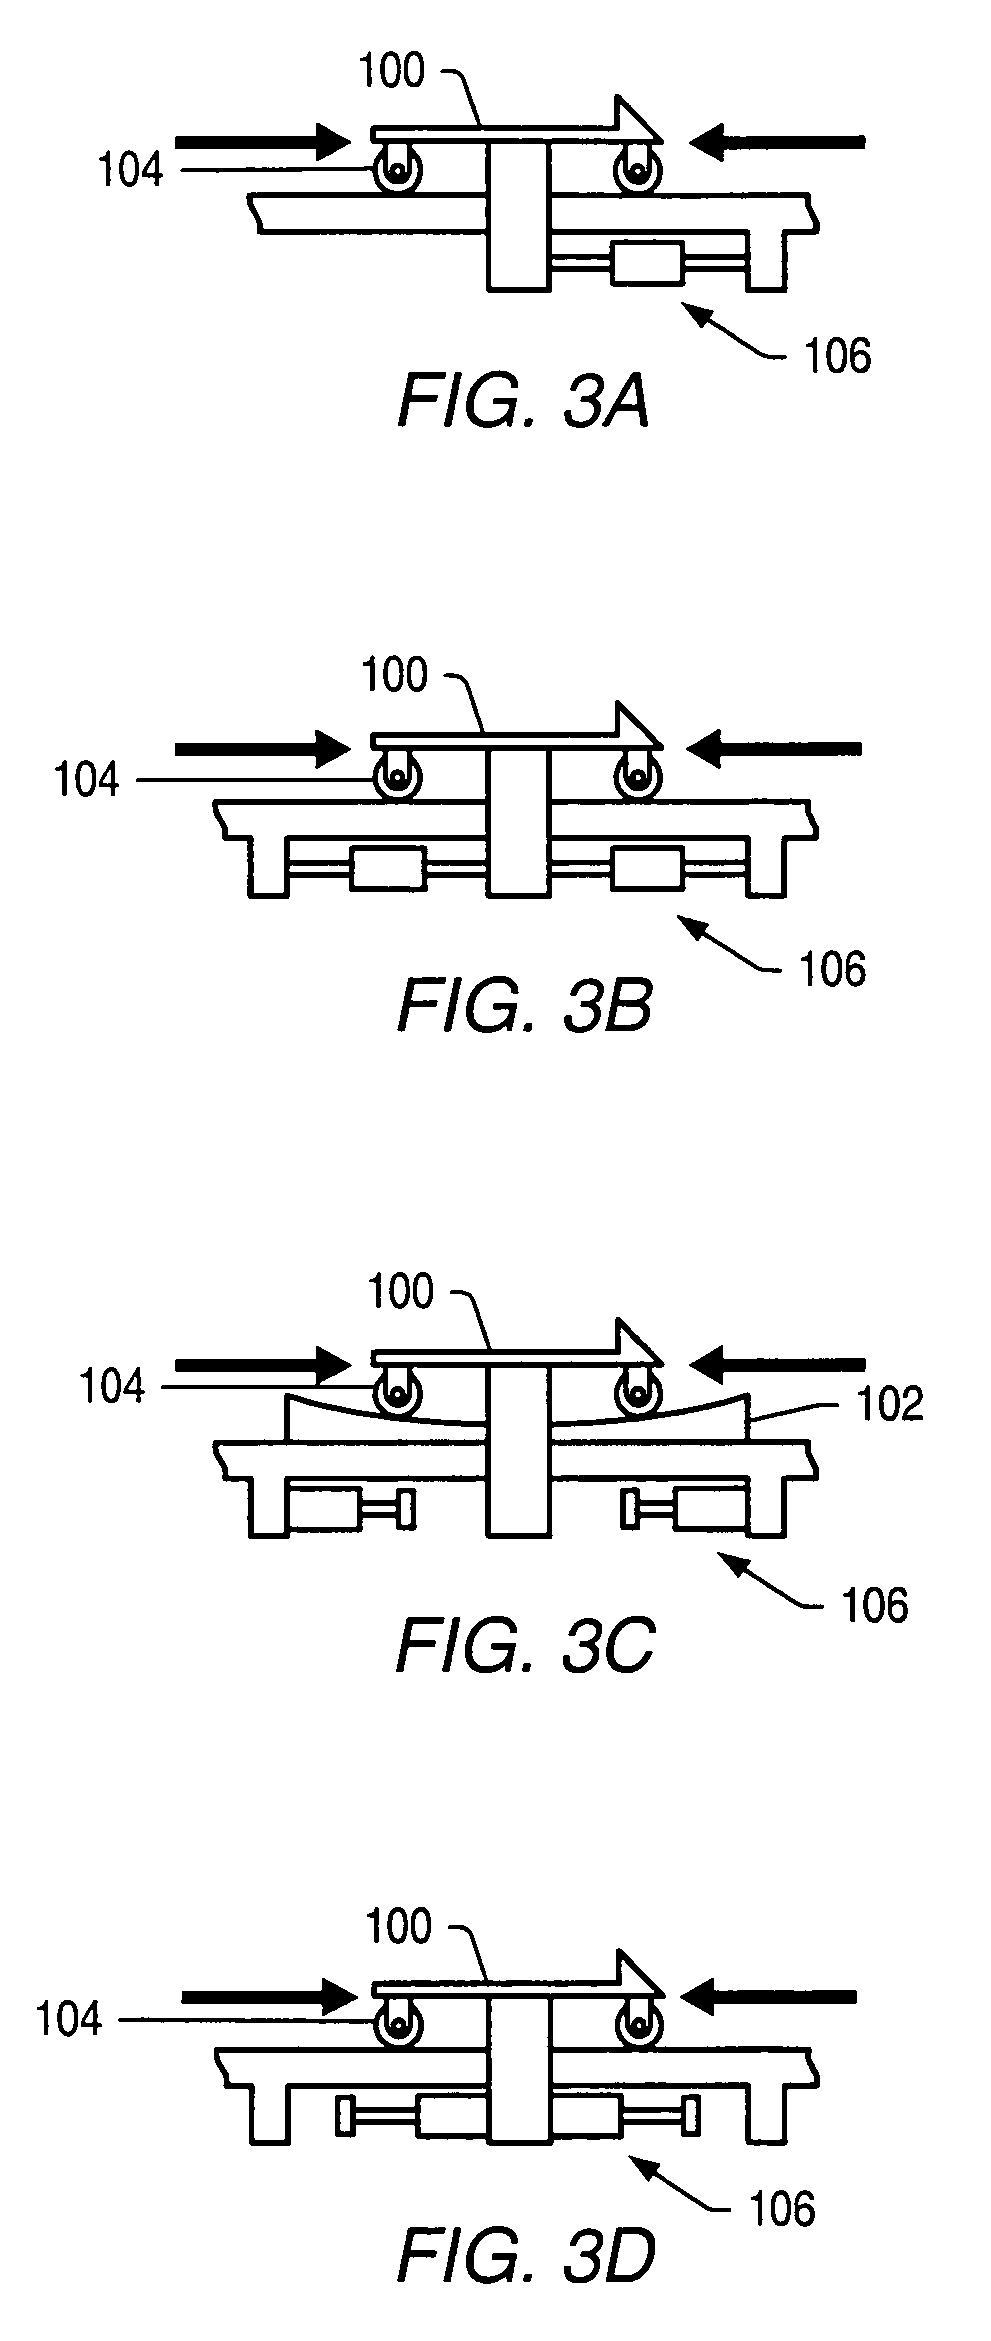 Exercise apparatus with a variable stride system